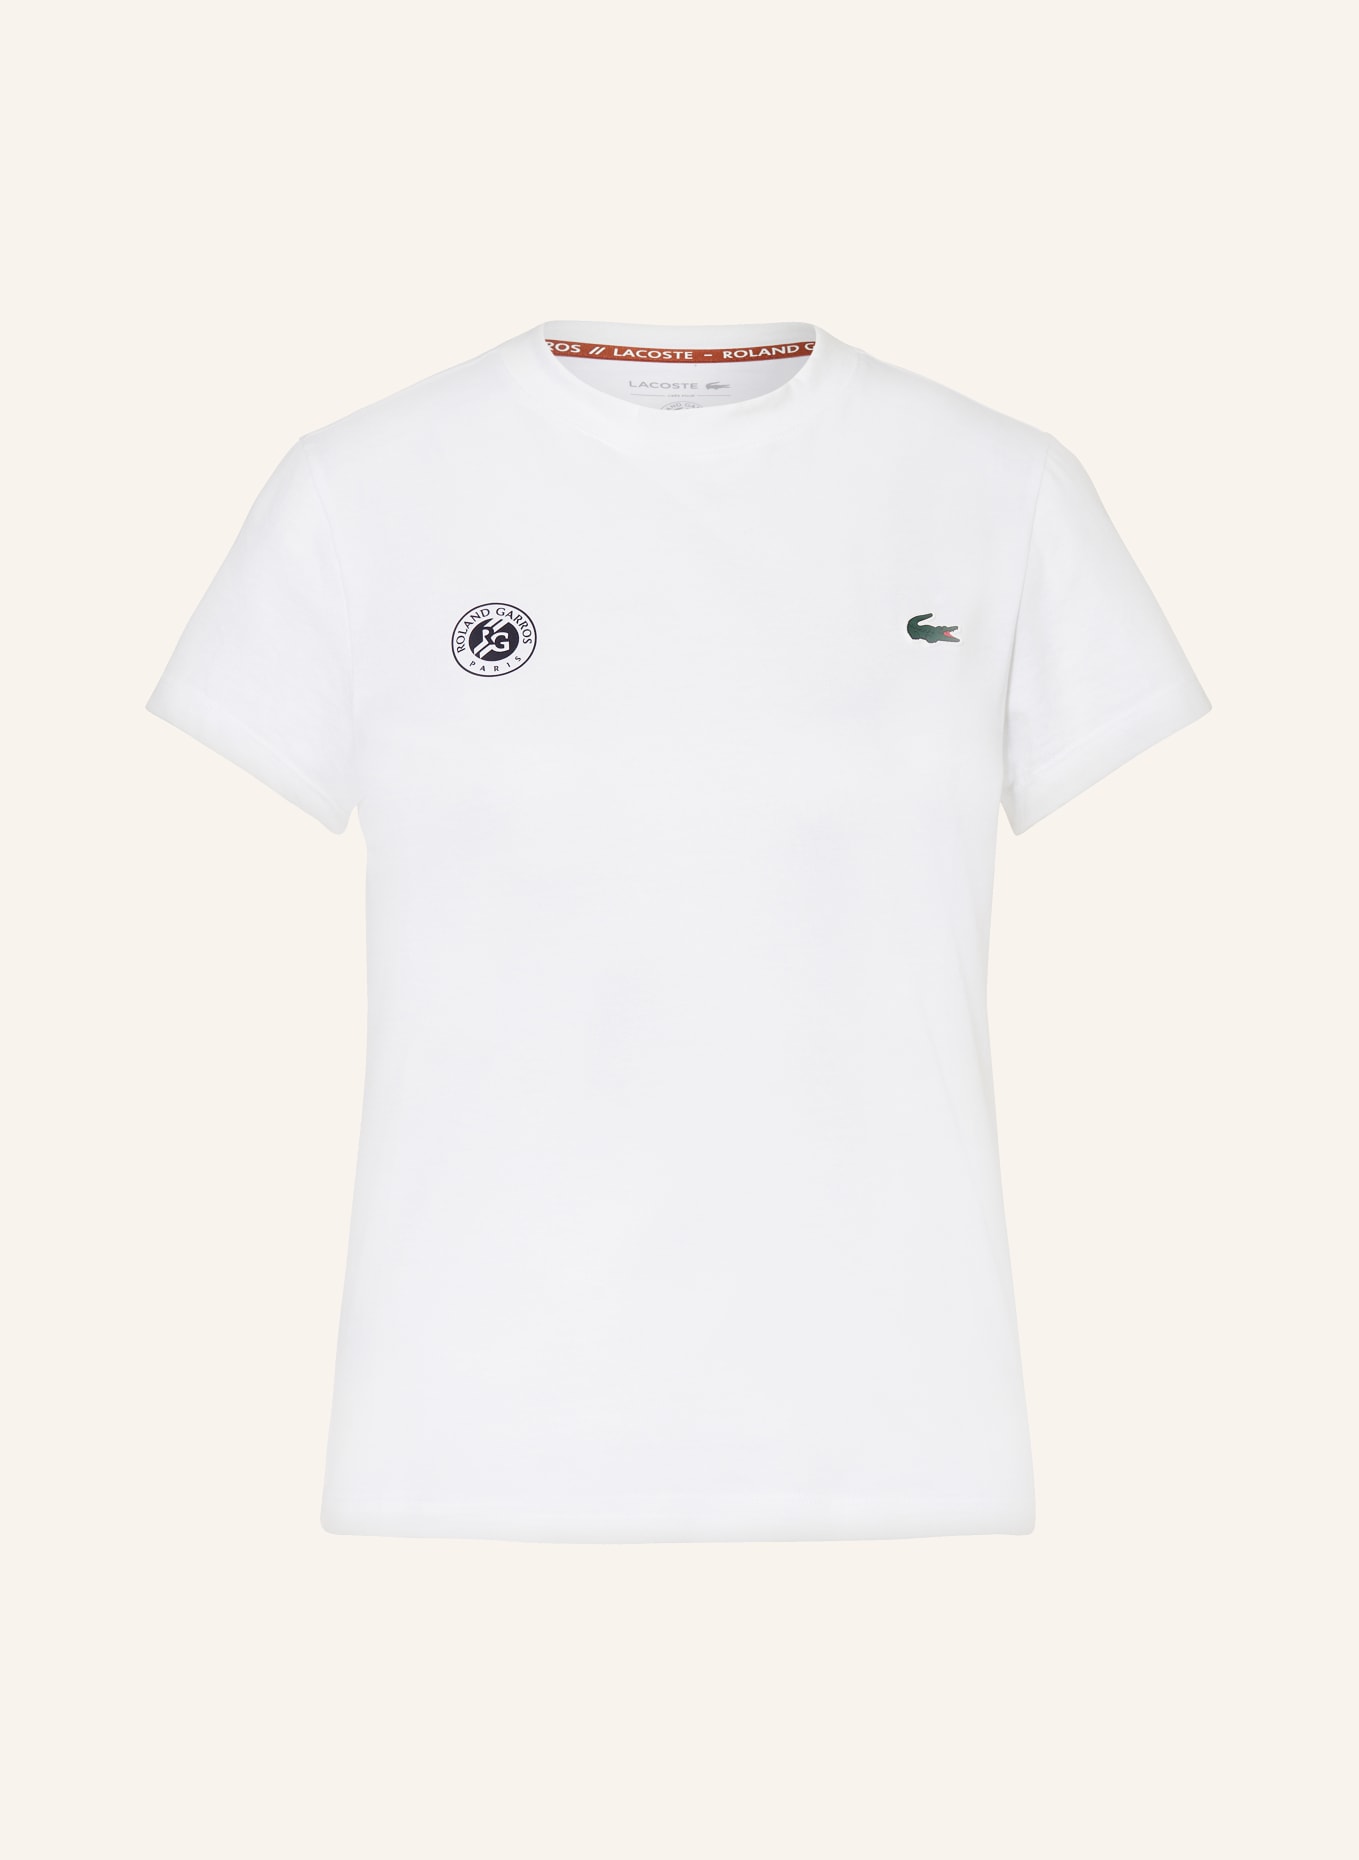 LACOSTE T-Shirt ULTRA-DRY, Farbe: WEISS (Bild 1)